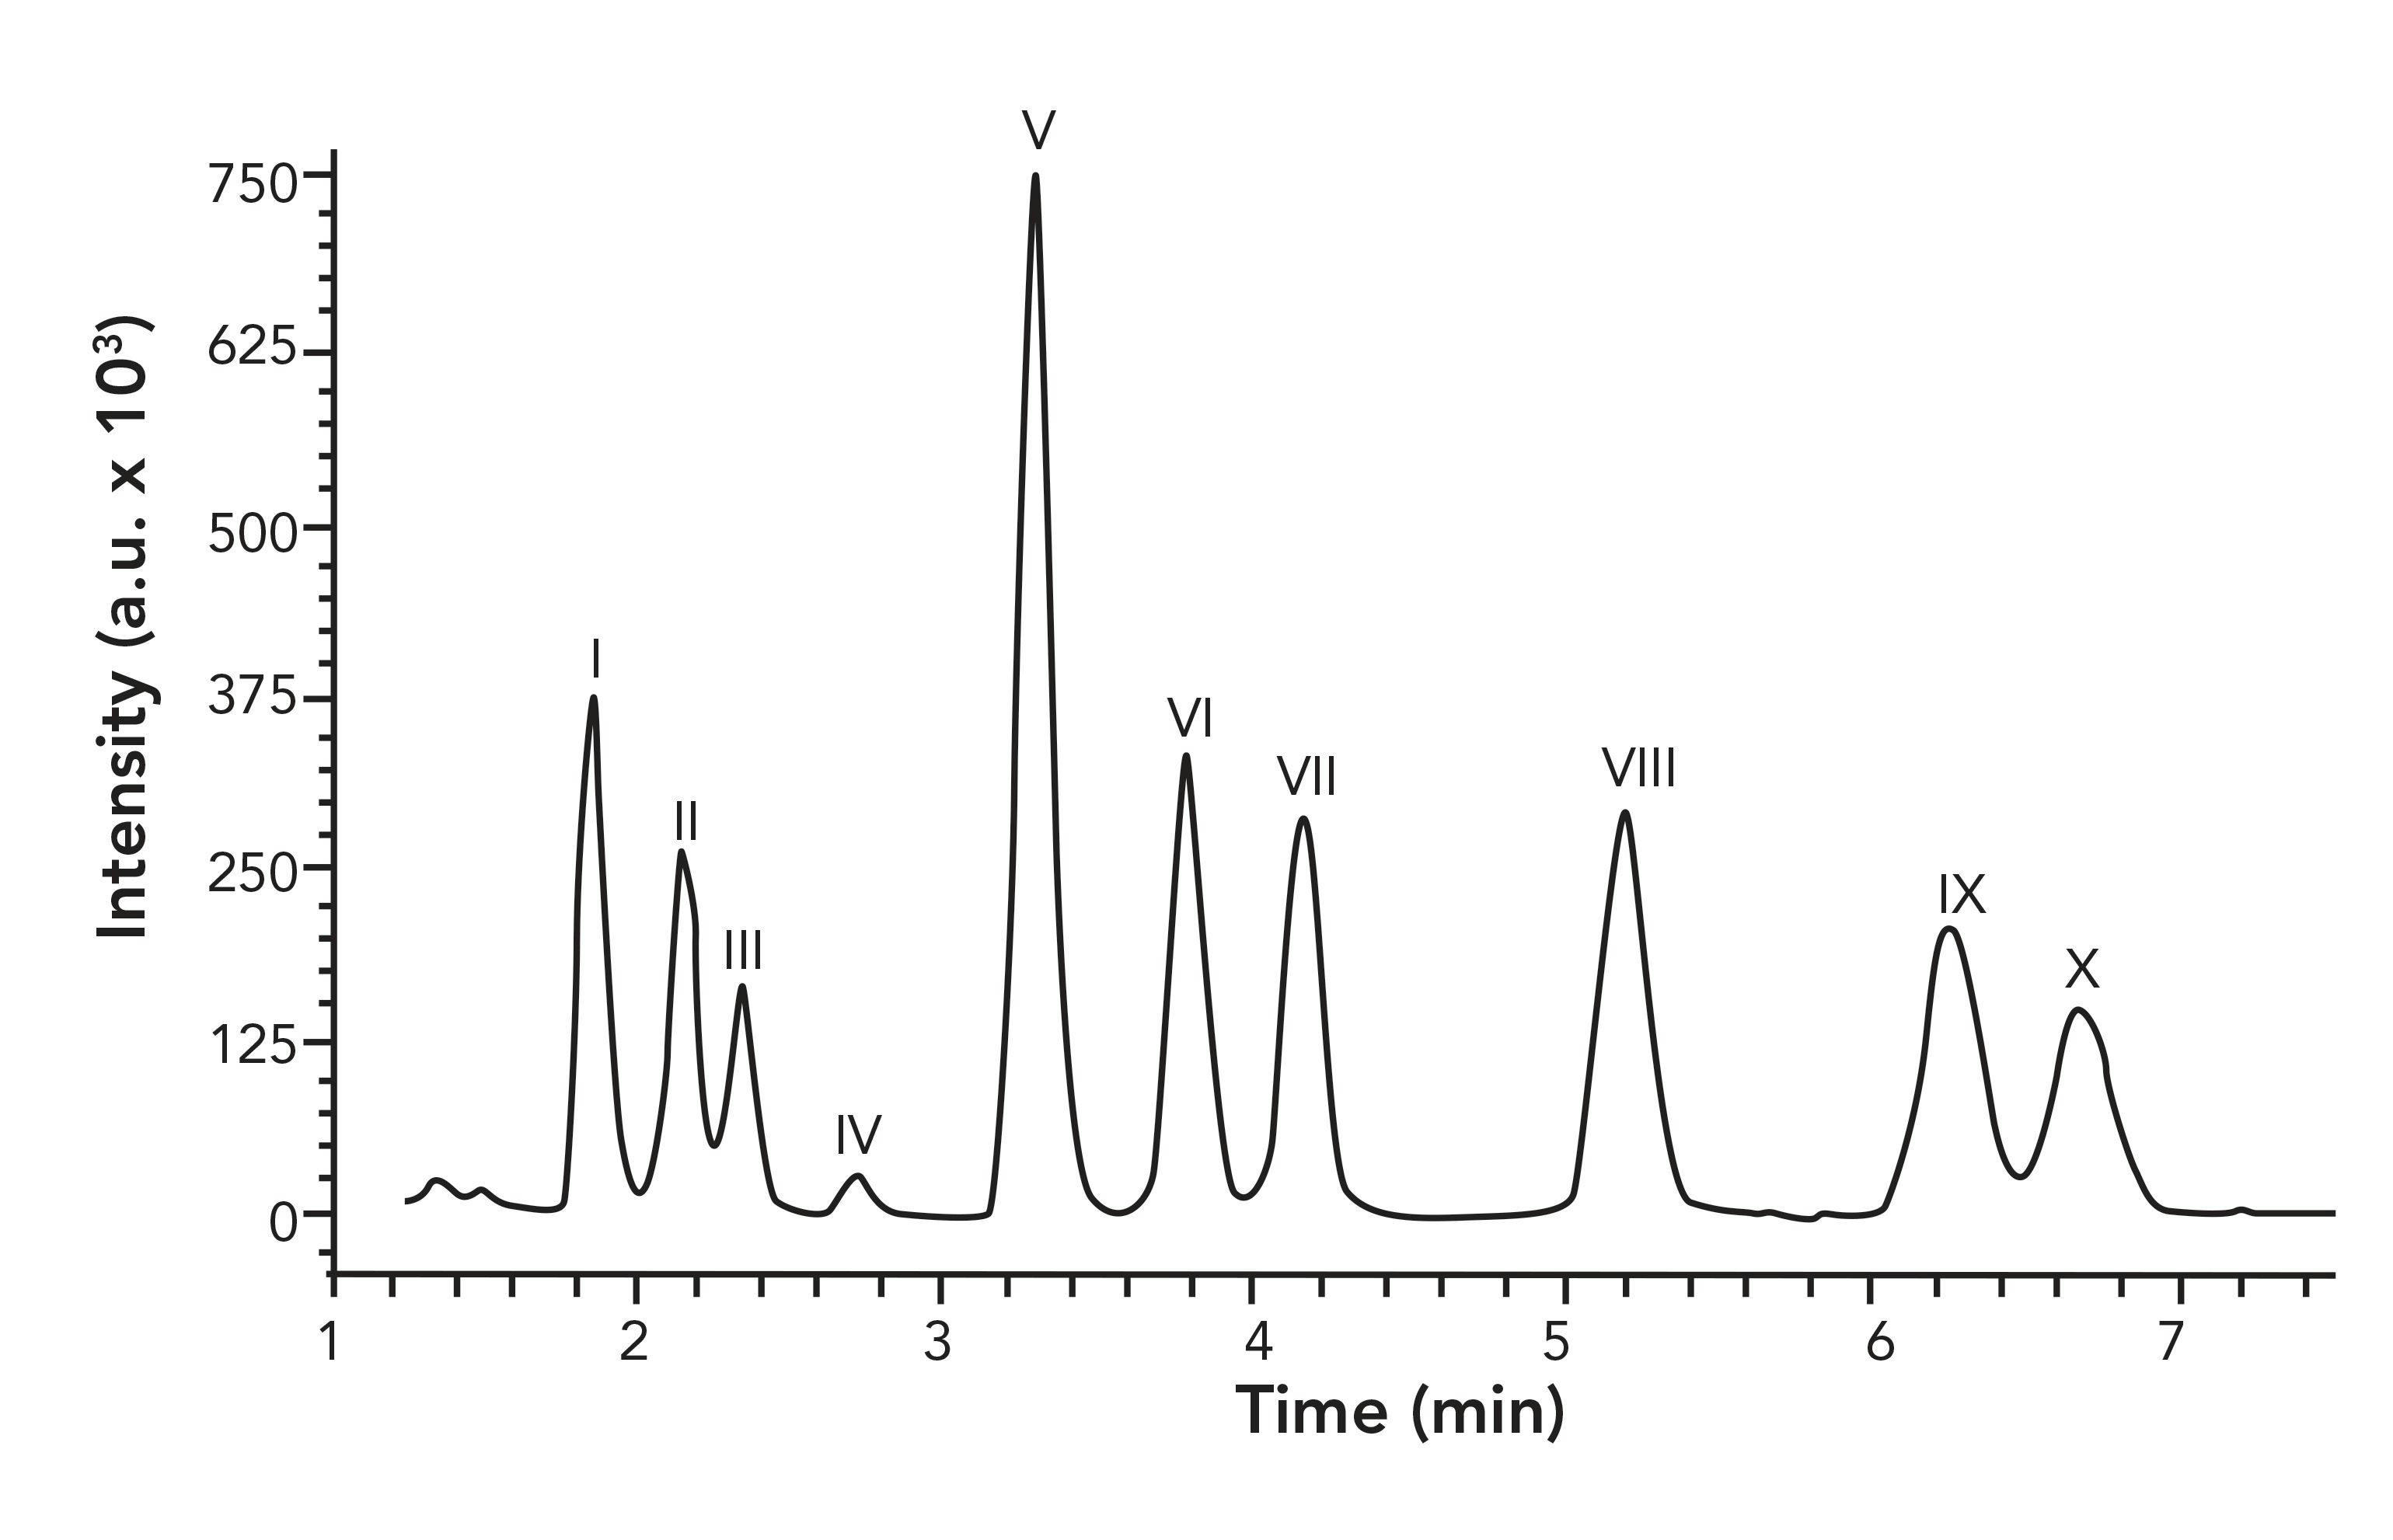 FIGURE 2: Optimized separation of pentacyclic triterpenoids on a mixed-mode stationary phase. I is betulin, II is erythrodiol, III is uvaol, IV is friedelin, V is lupeol, VI is β-amyrin, VII is α-amyrin, VIII is betulinic acid, IX is oleanolic acid and X is ursolic acid. Note a.u. is arbitrary units. Reproduced with permission from reference (22).